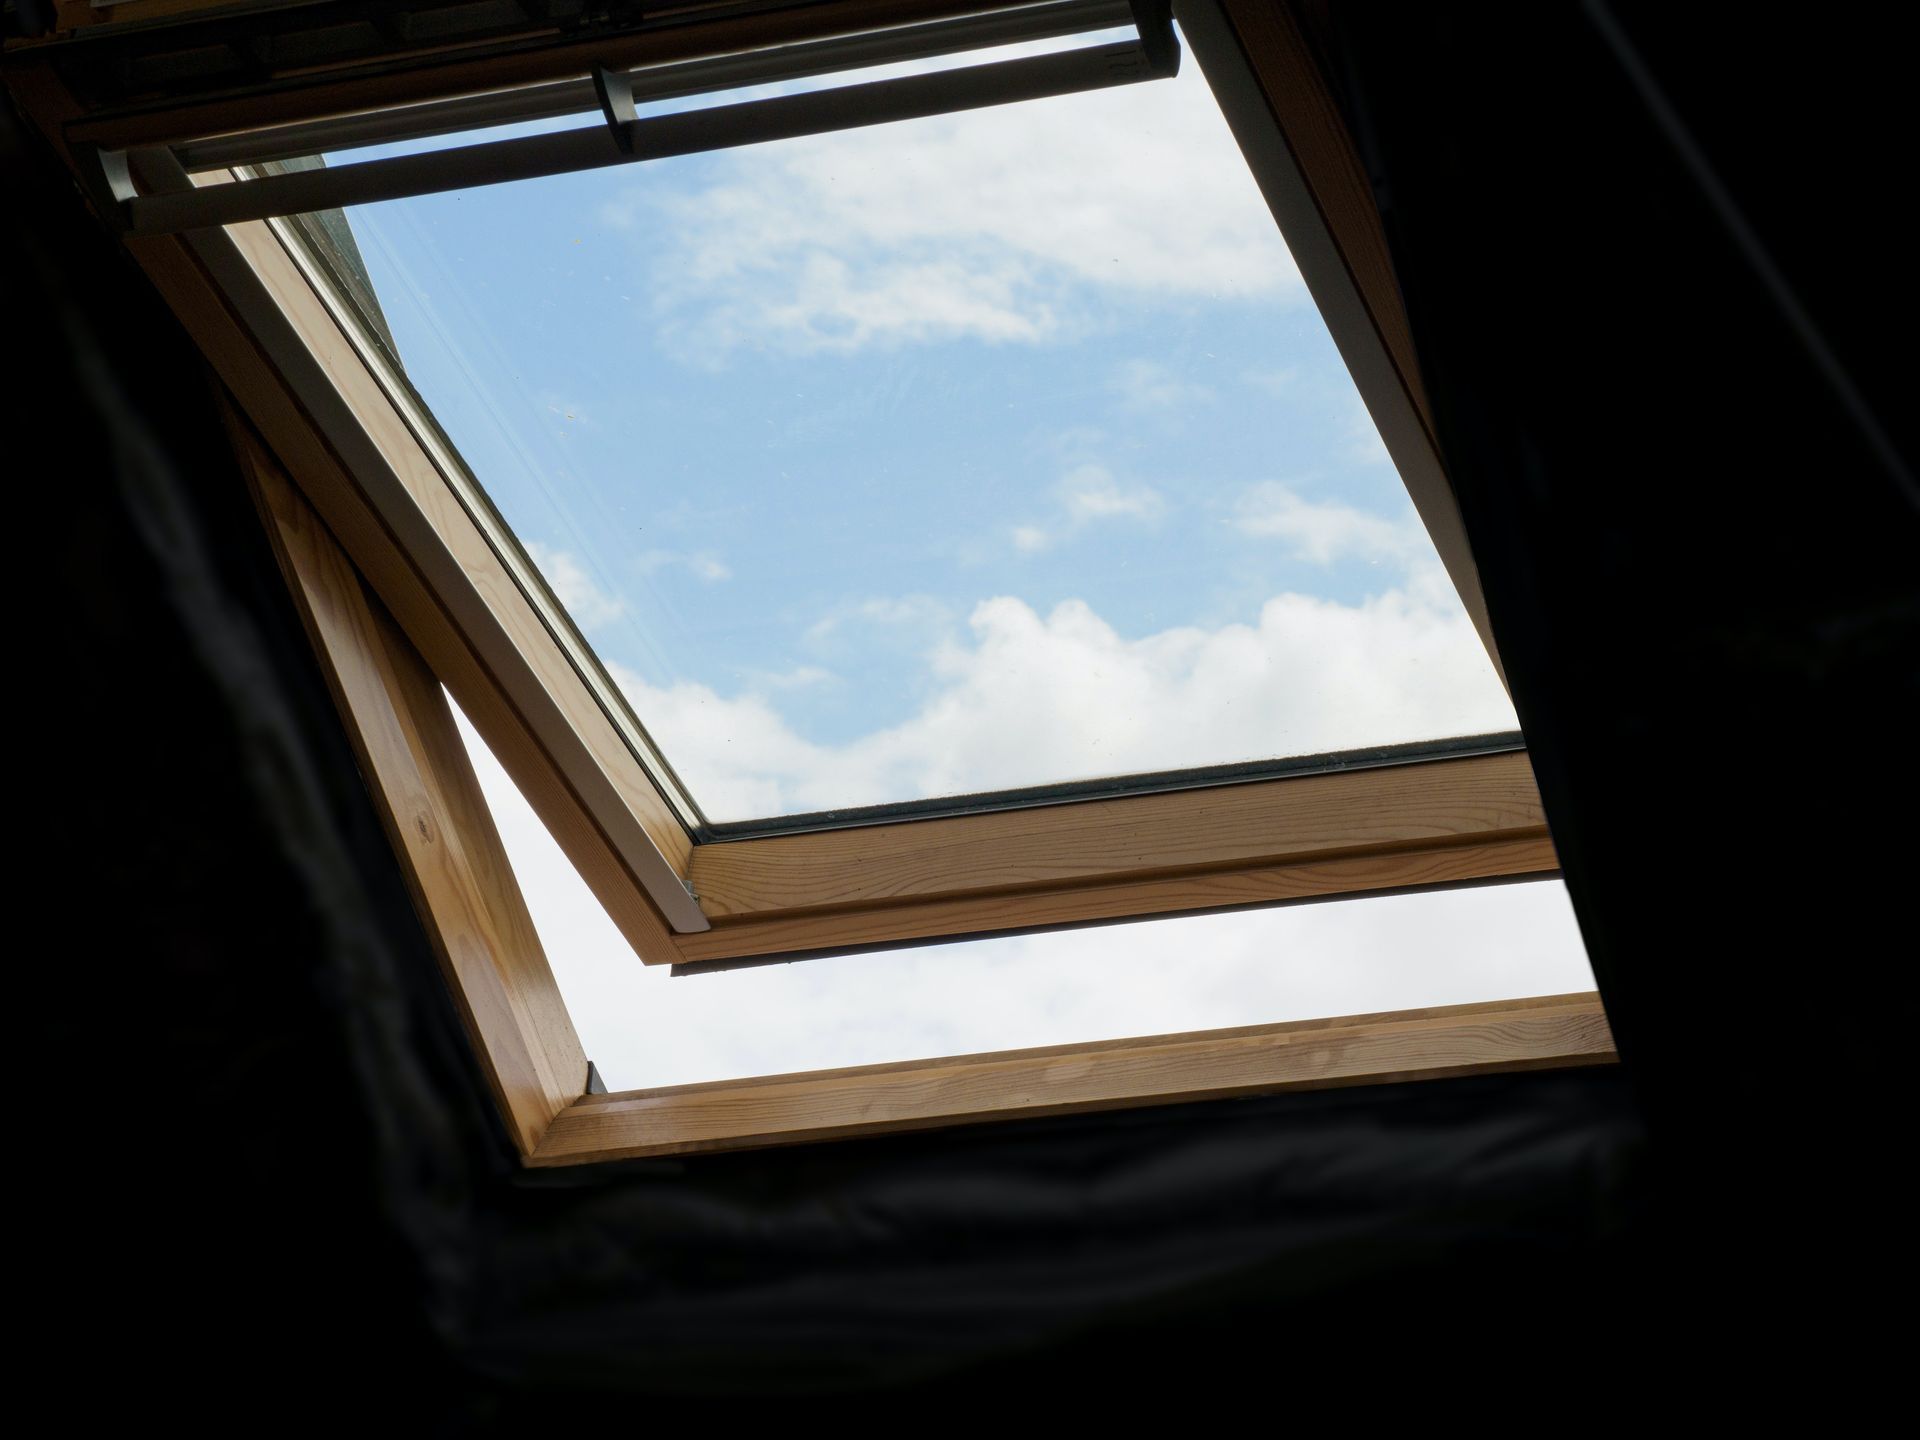 Attic Awning window opened with view of the sky